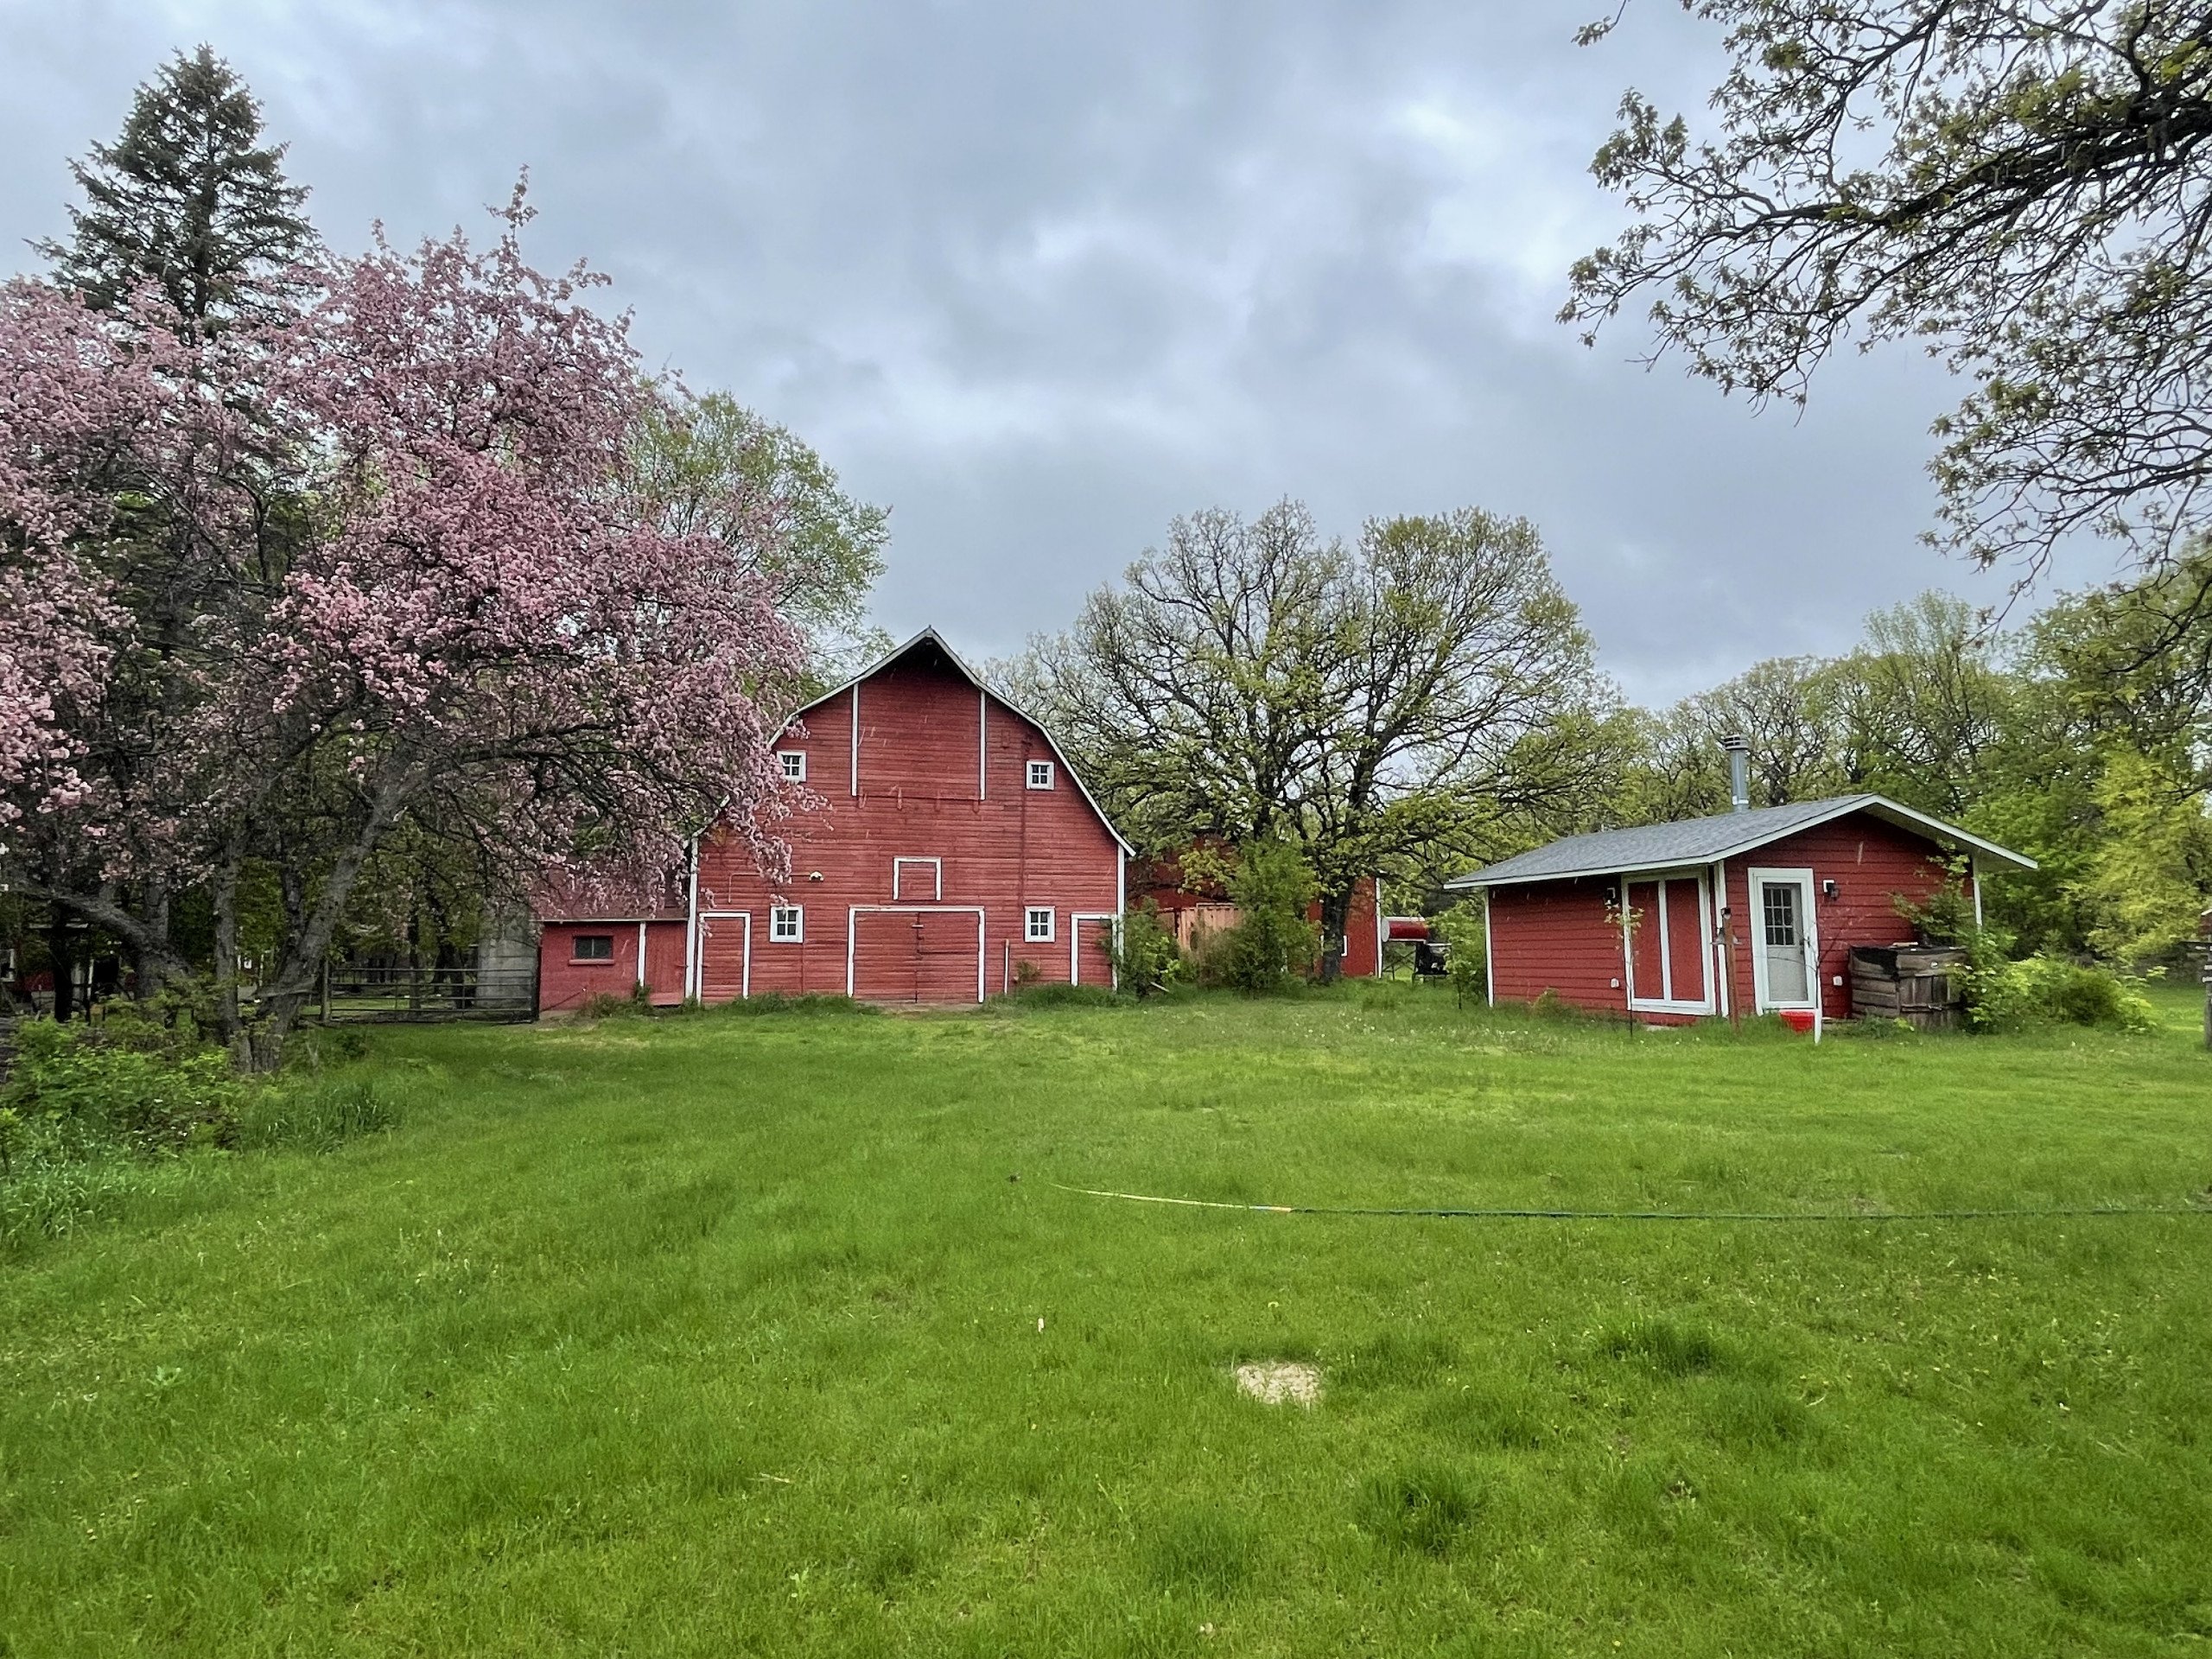 residential-auctions-land-sherburne-county-minnesota-85-acres-listing-number-16161-red barn and she shed main to use-4.jpg